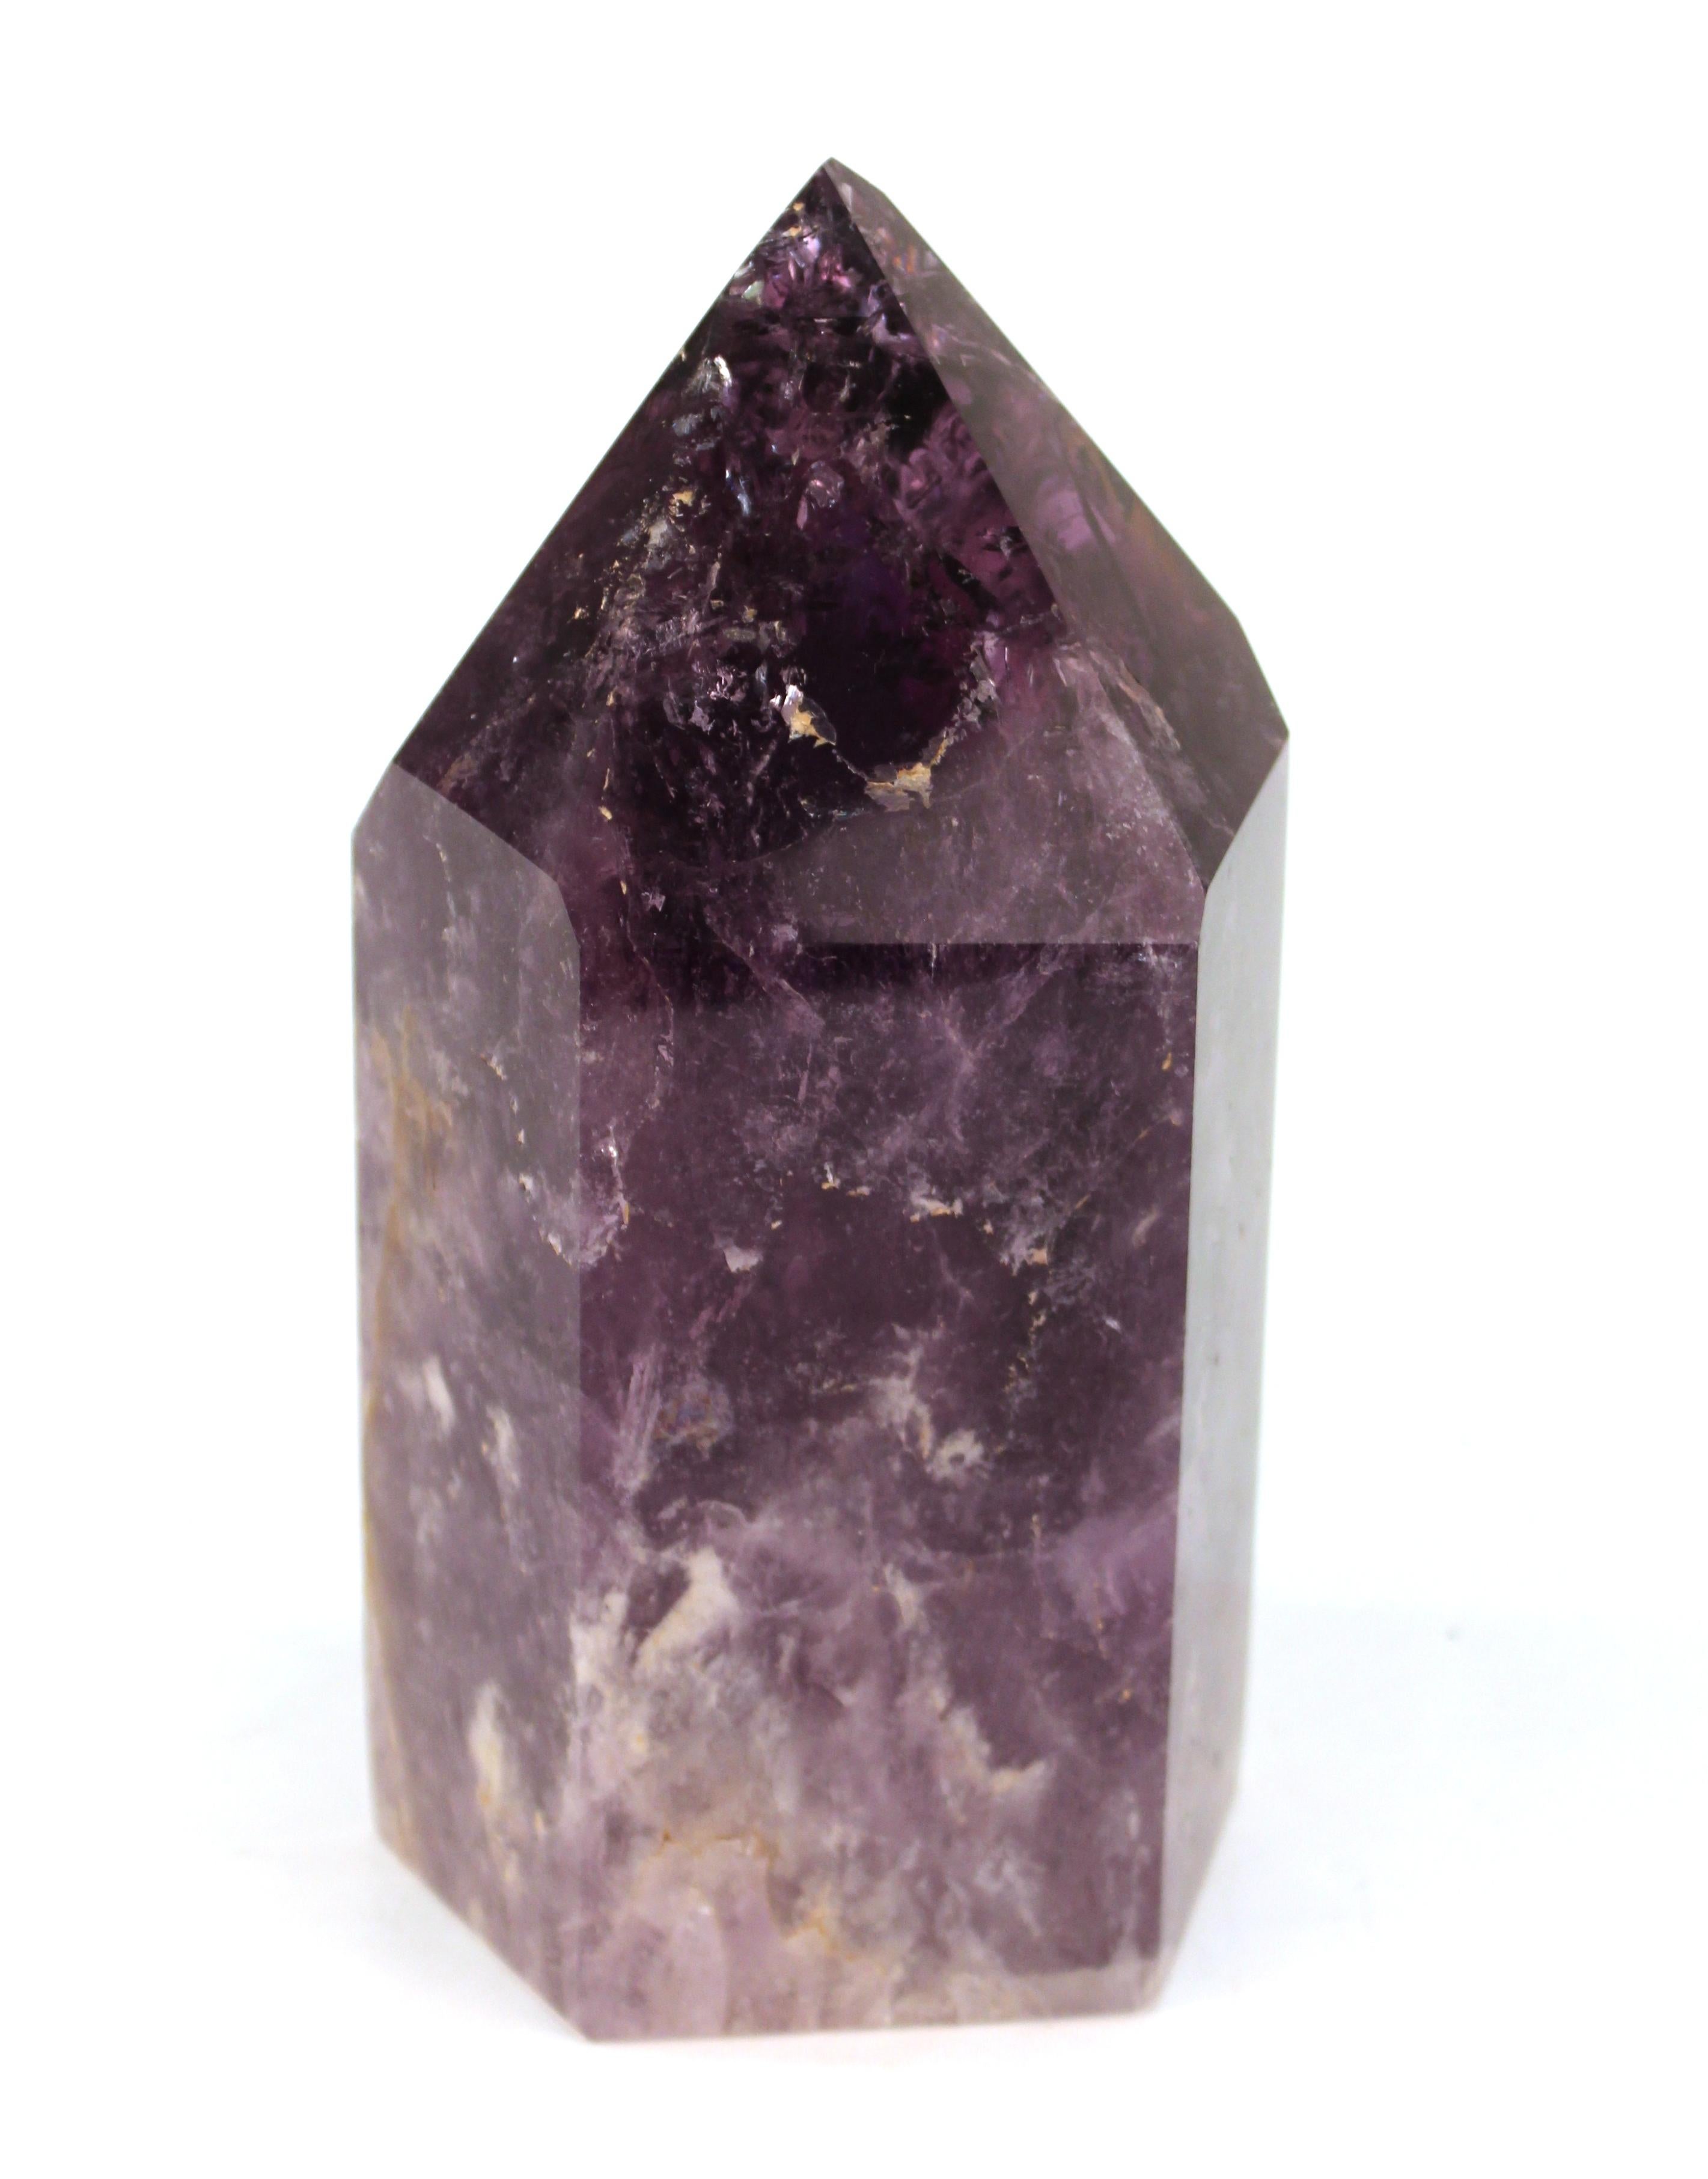 Amethyst quartz decorative mineral specimen in shape of a large shard or prism. The piece is in good condition.